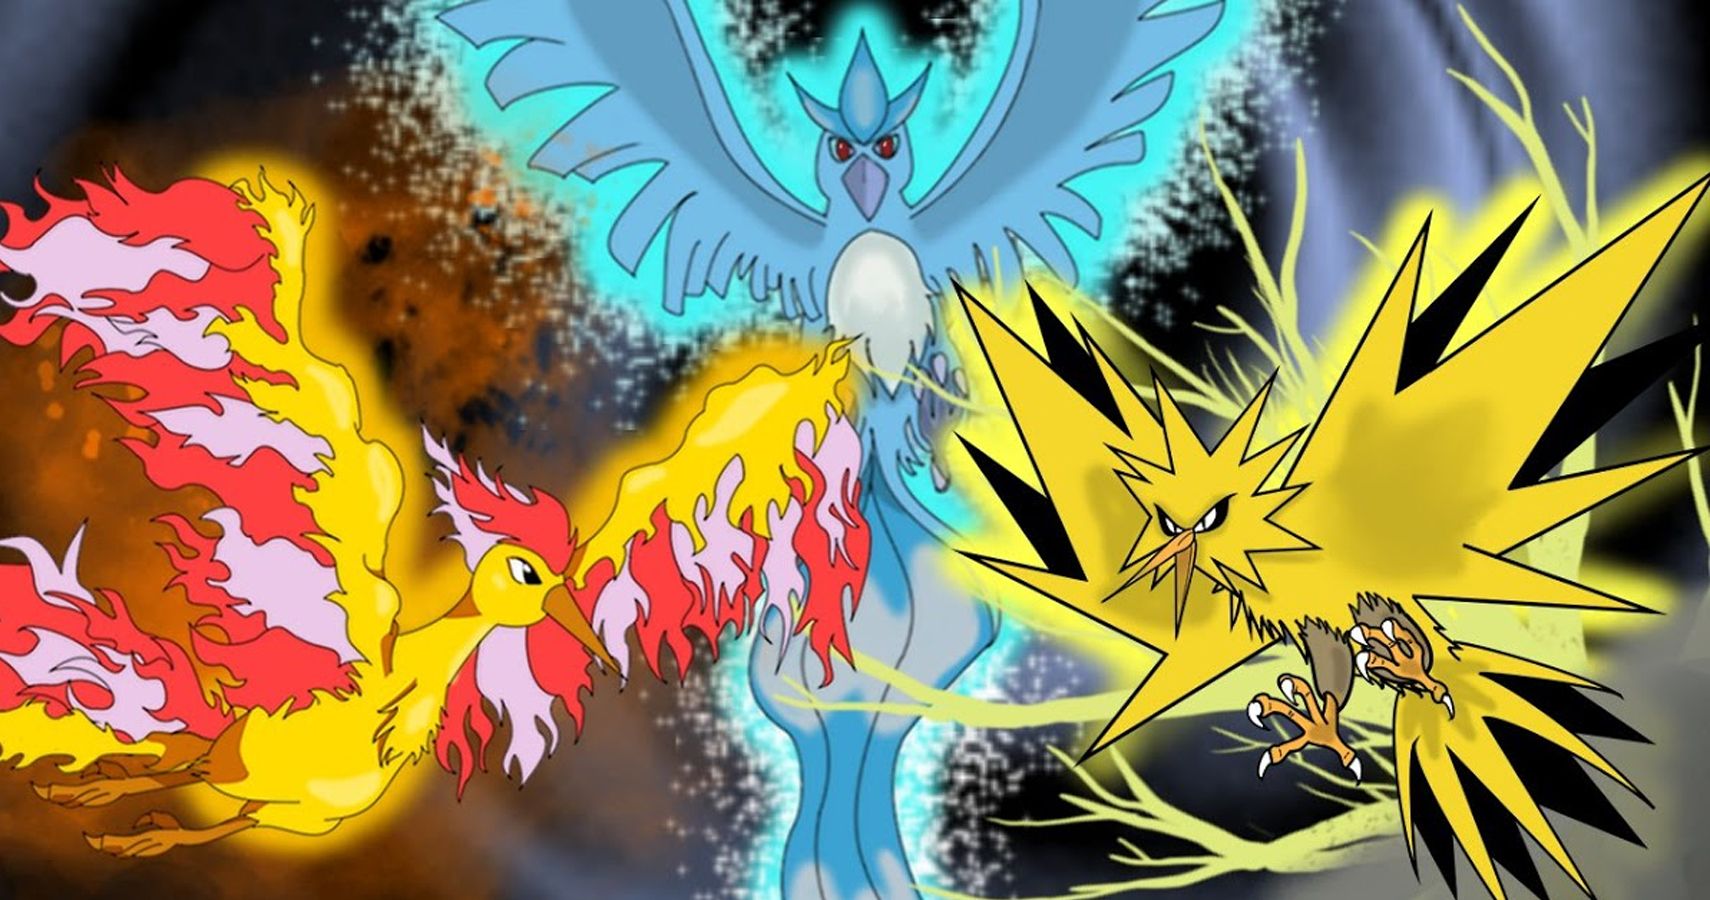 Articuno + Moltres + Zapdos I drew. Thought you might like it! - Gaming